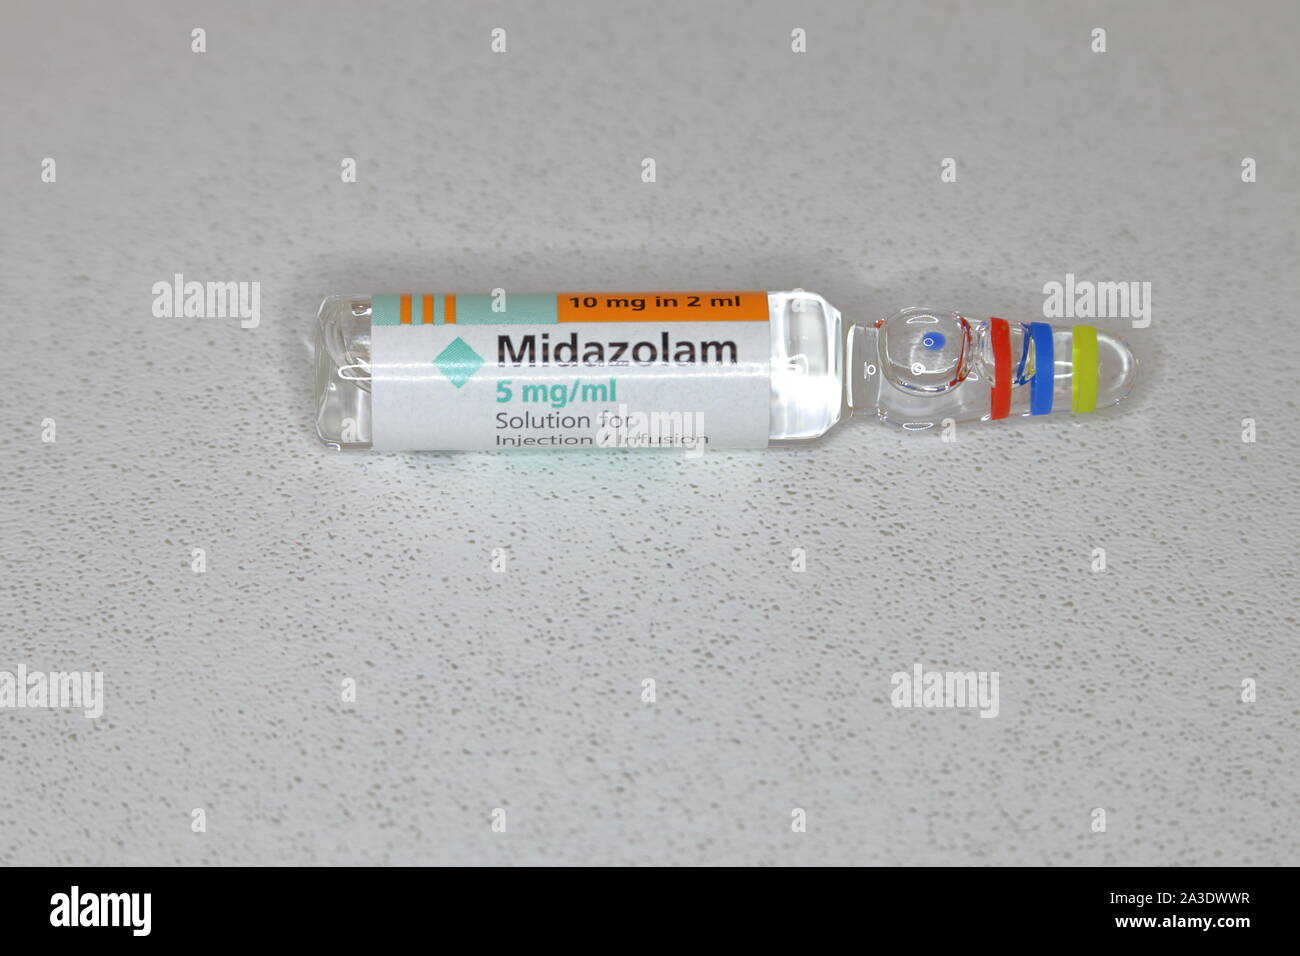 Midazolam 5mg per ml in a 2ml ampoule Stock Photo